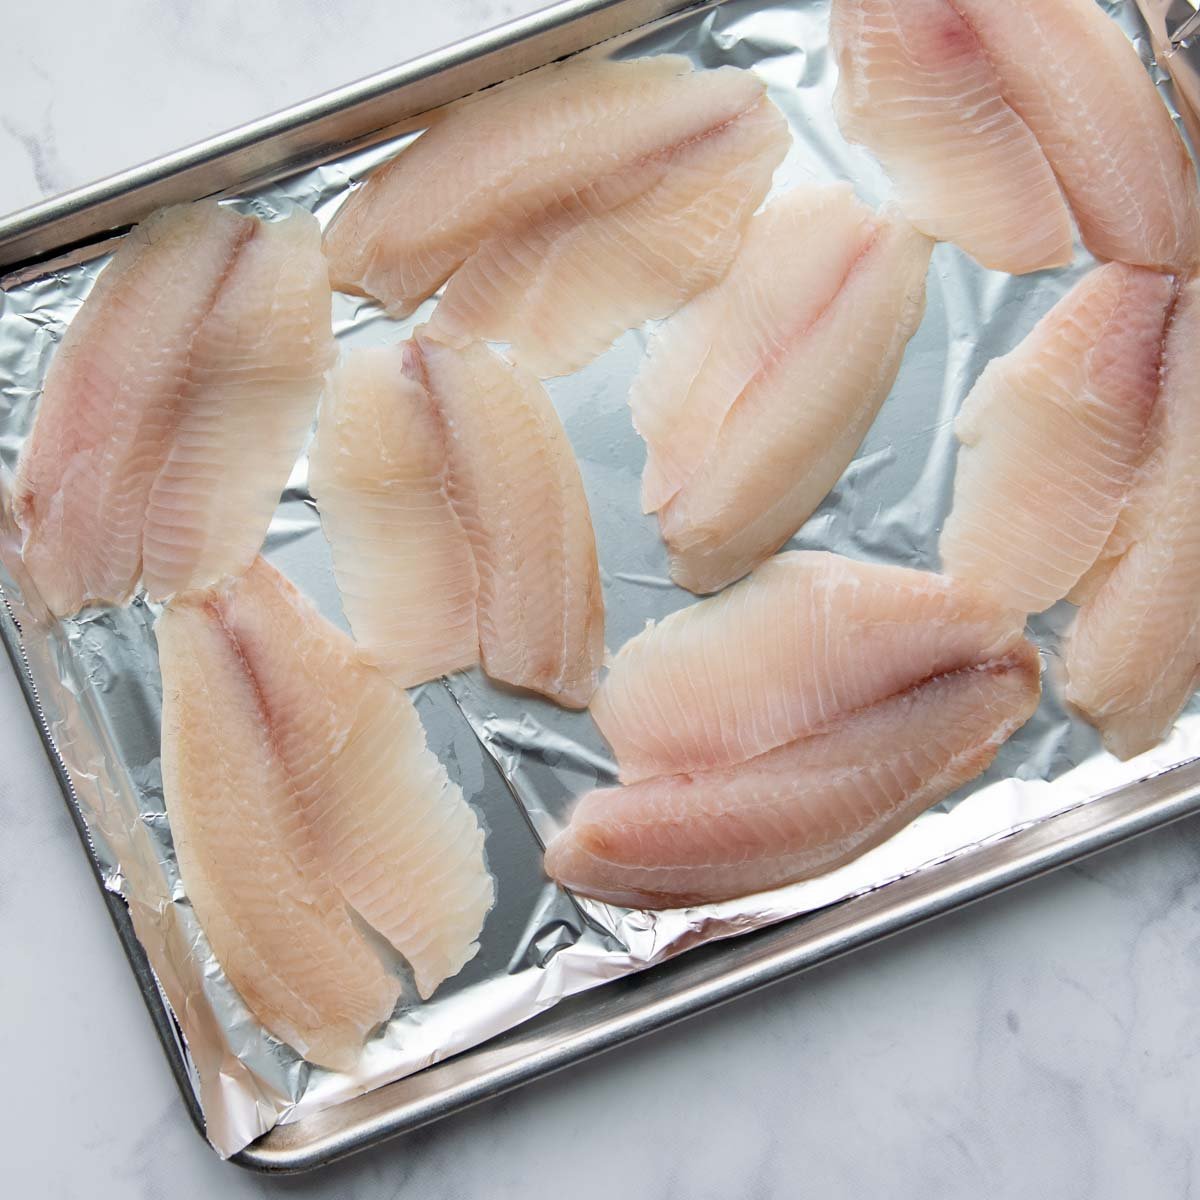 unbaked tilapia on a foil lined baking sheet